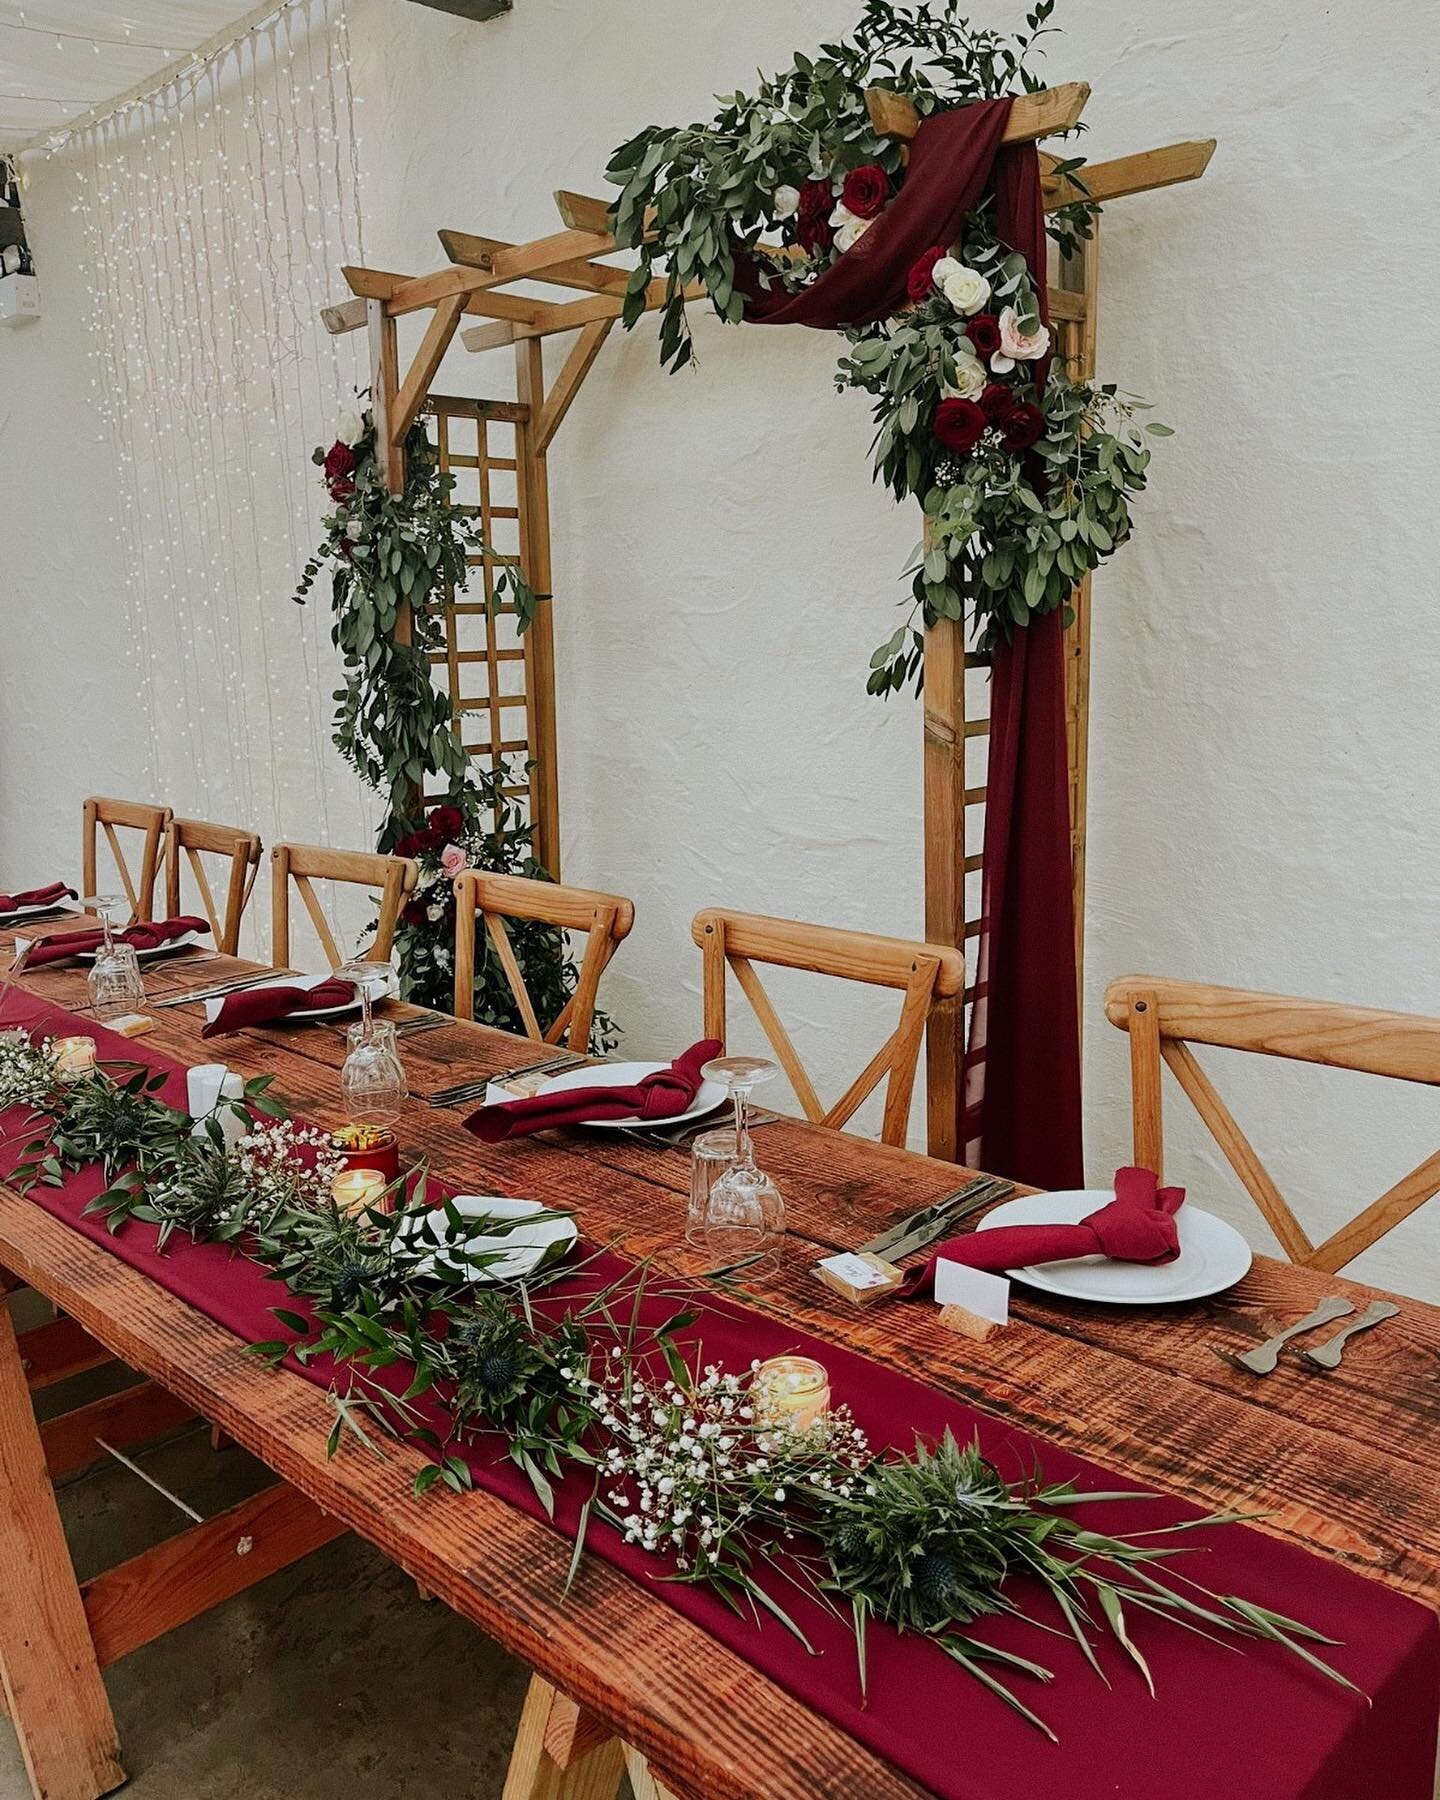 What a way to kick off our March weddings! ❤️

Louise &amp; Aidan had an absolutely stunning colour palette which complimented the barn beautifully. Along with lots of personal touches, from photos to skis as the guest book! 🎿

Louise&rsquo;s mum an